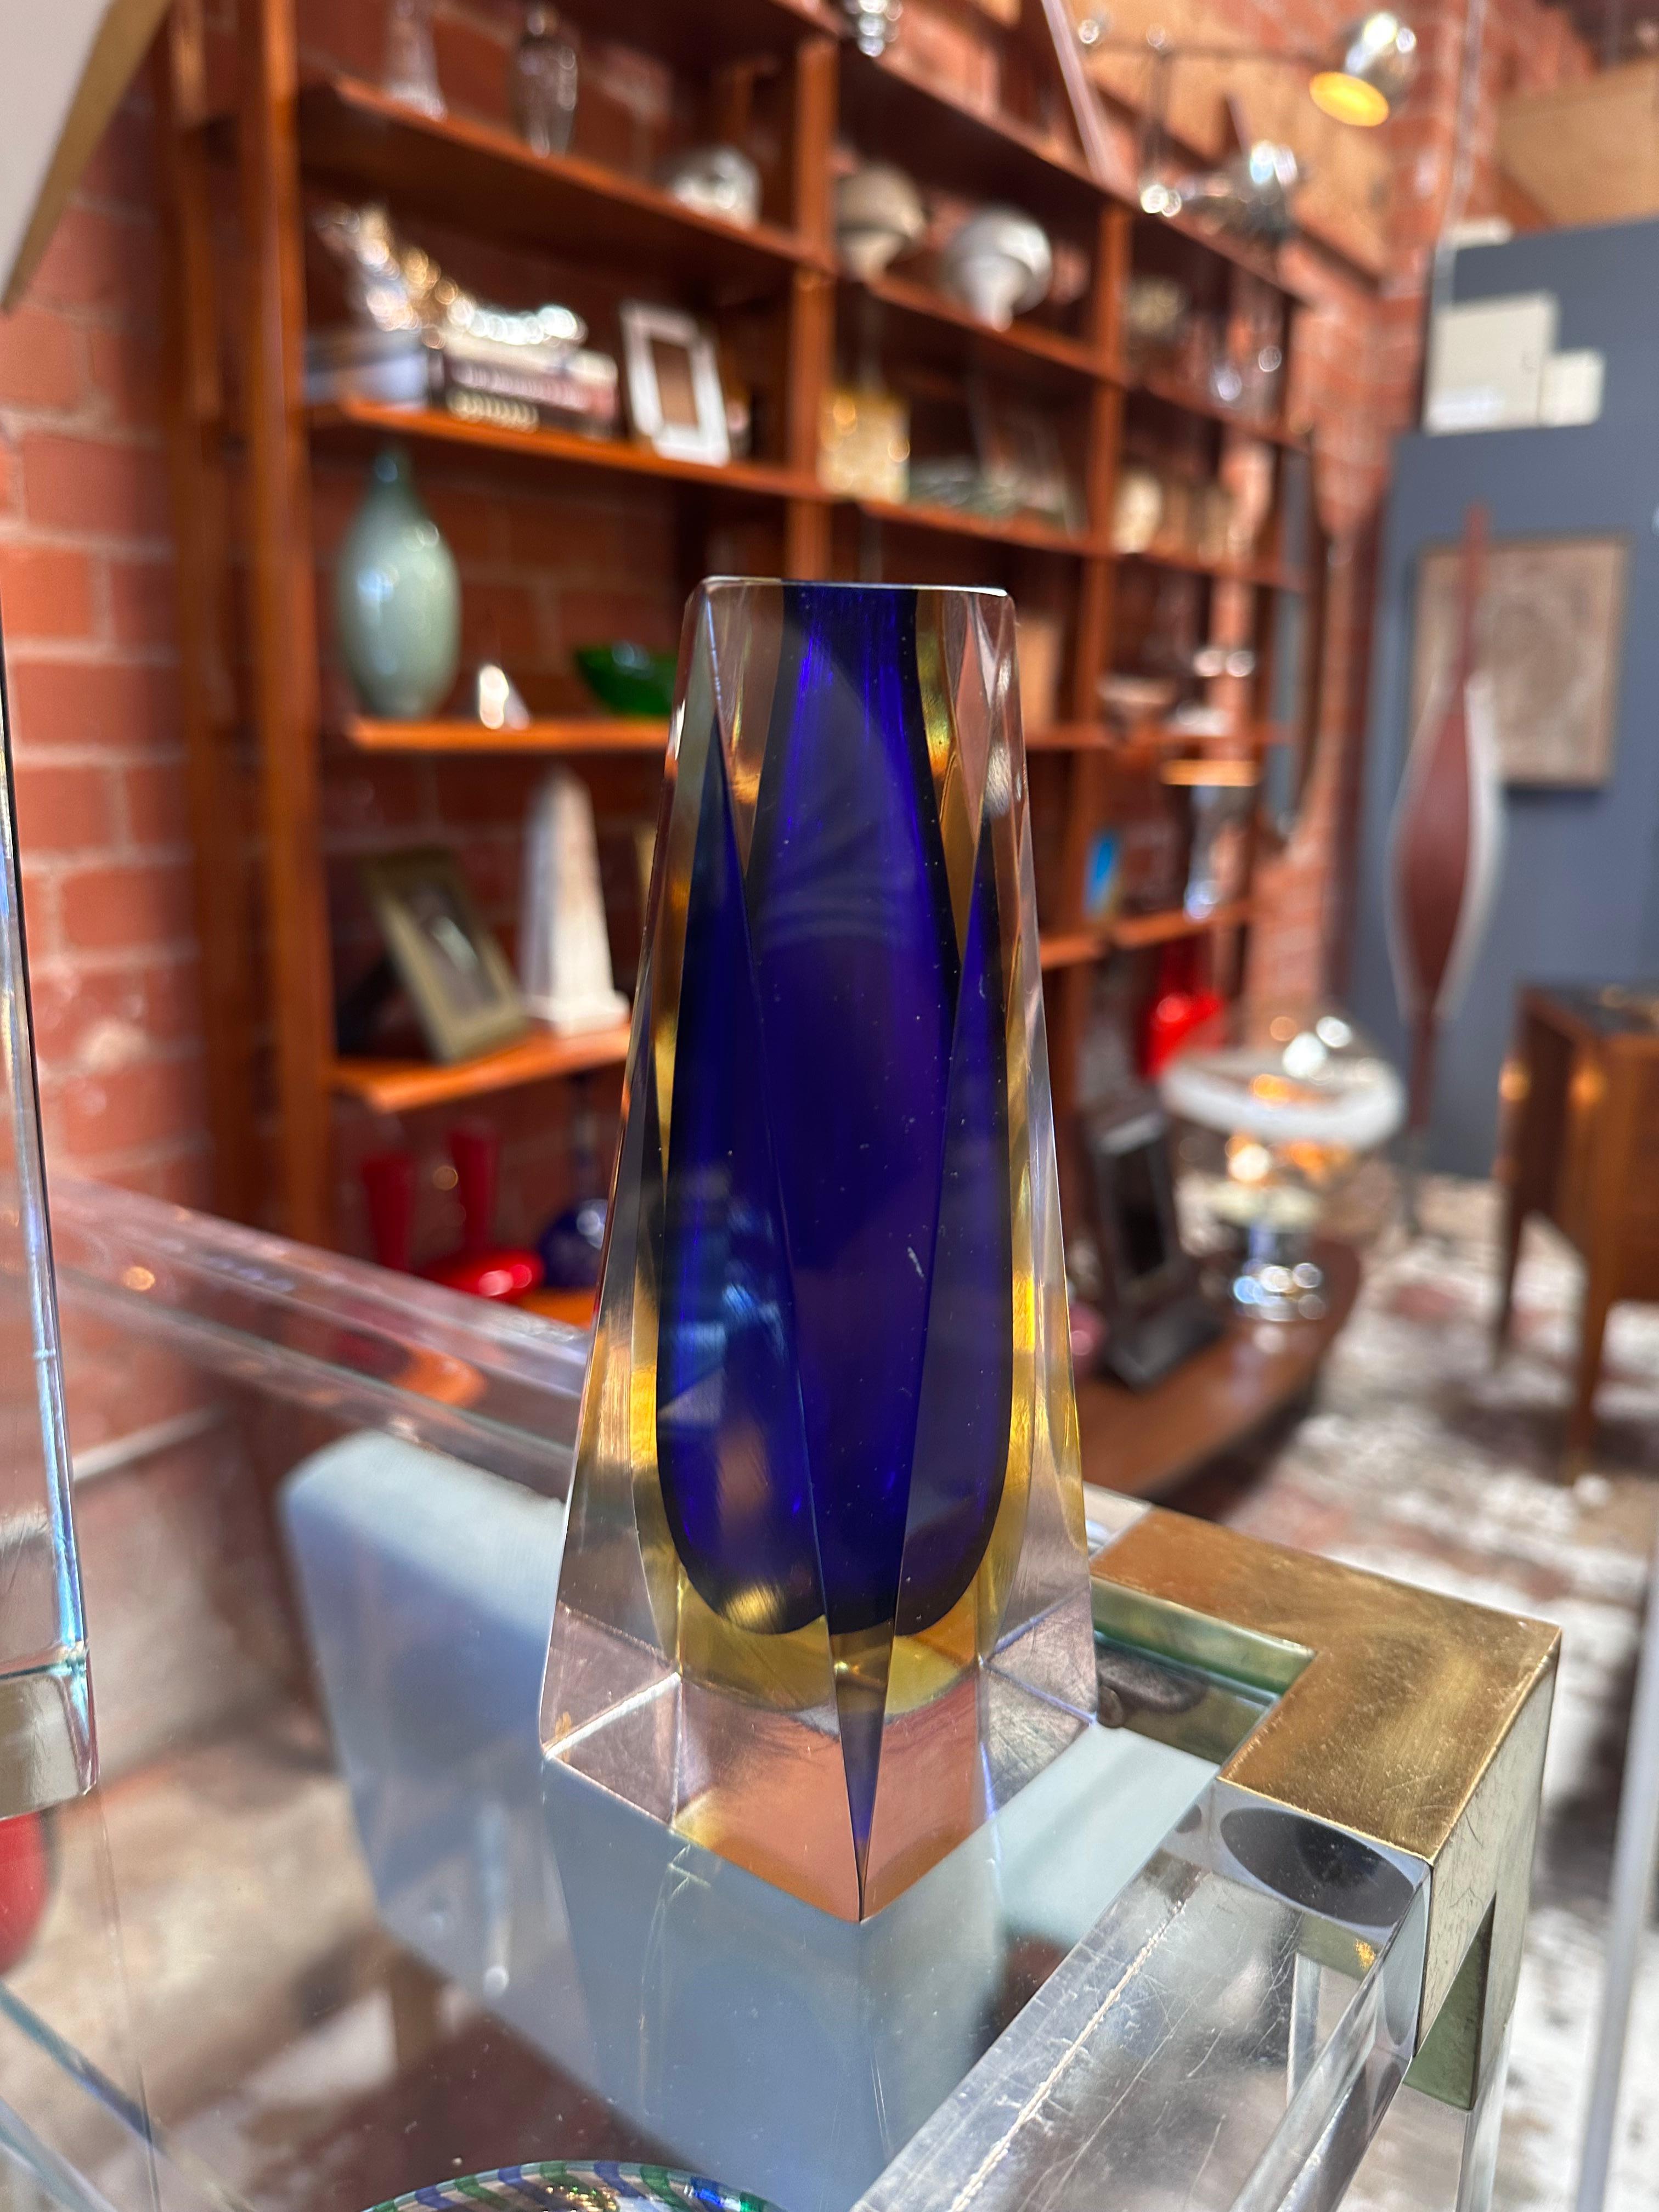 The Small Decorative Italian Murano Vase by Mandruzzato, crafted in the 1960s, is a remarkable example of Murano glass artistry. With its intricate design and rich colors, this vase captures the essence of Italian craftsmanship. The play of light on